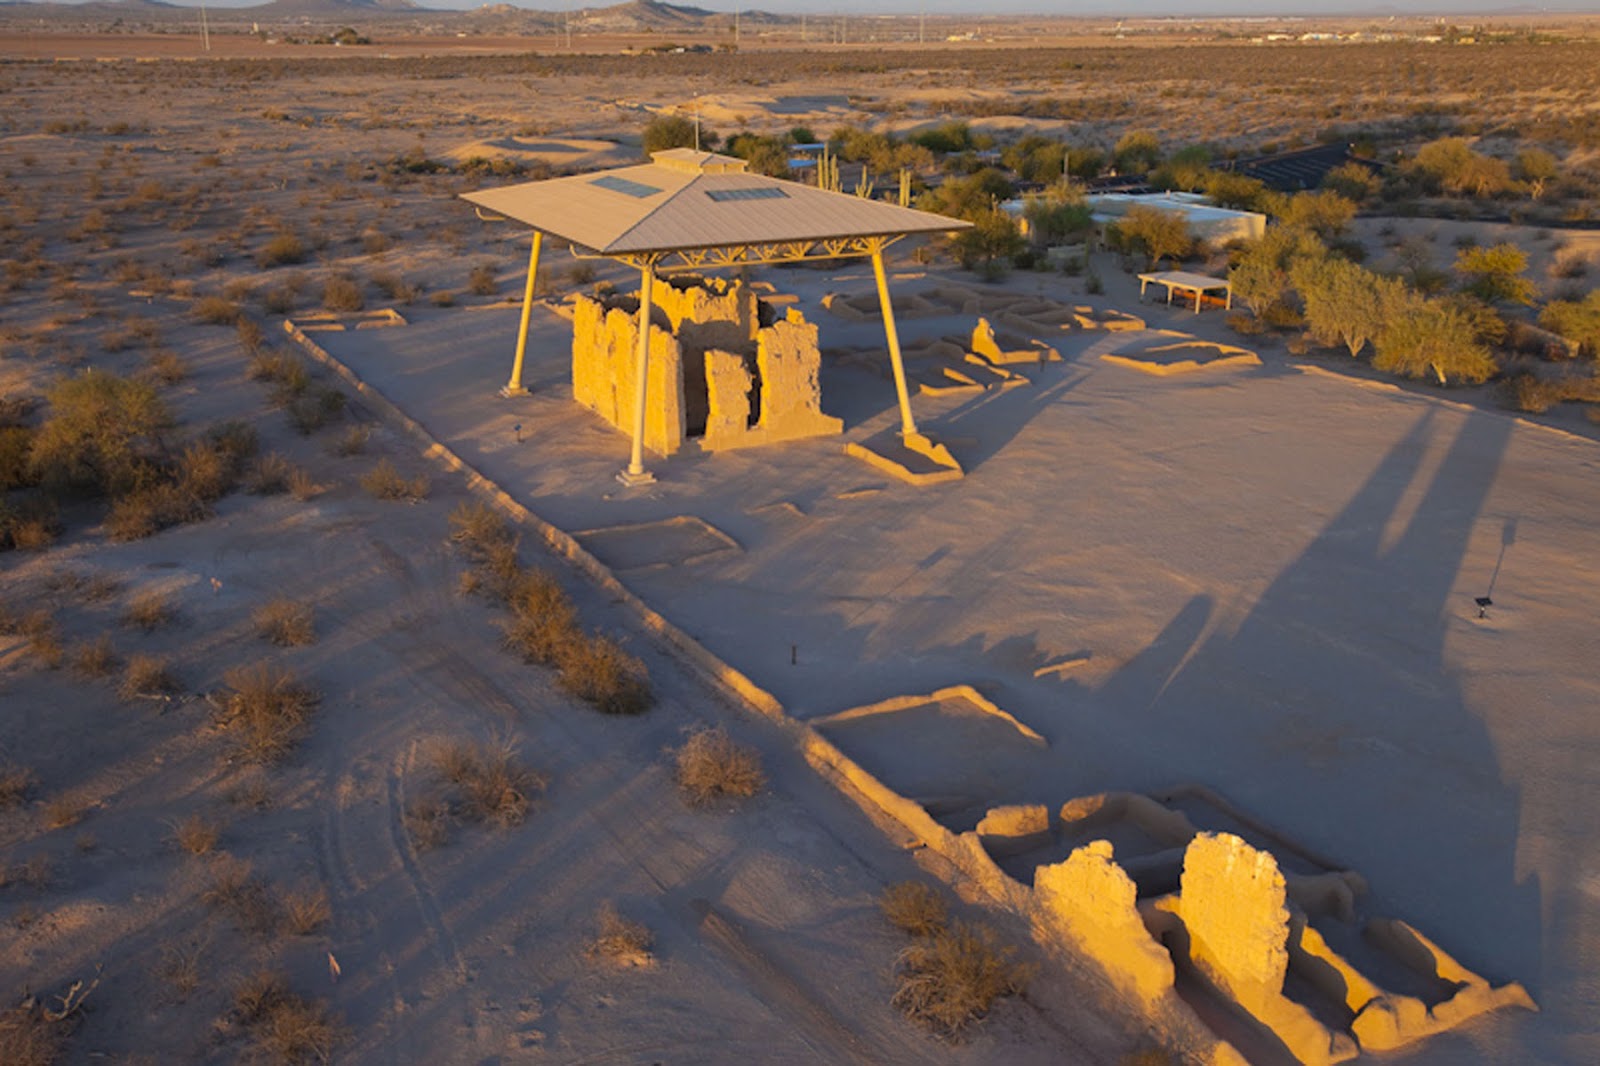 Casa Grande National Monument | Photo by Henry D. Wallace / Archaeological Southeast